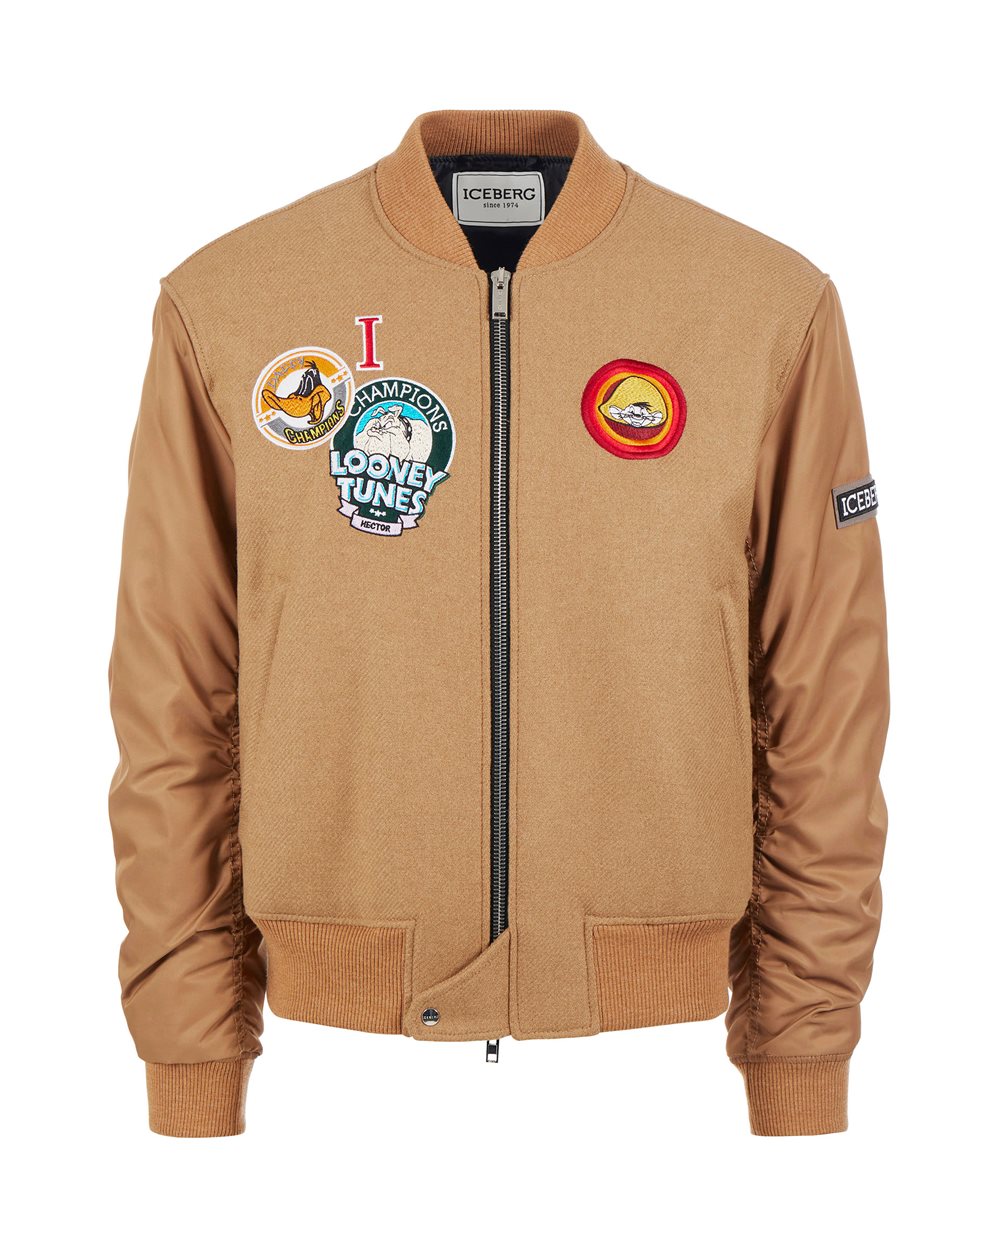 Bomber jacket with cartoon patches and logo -  ( SECONDO STEP DE ) PROMO SALDI UP TO 40% | Iceberg - Official Website